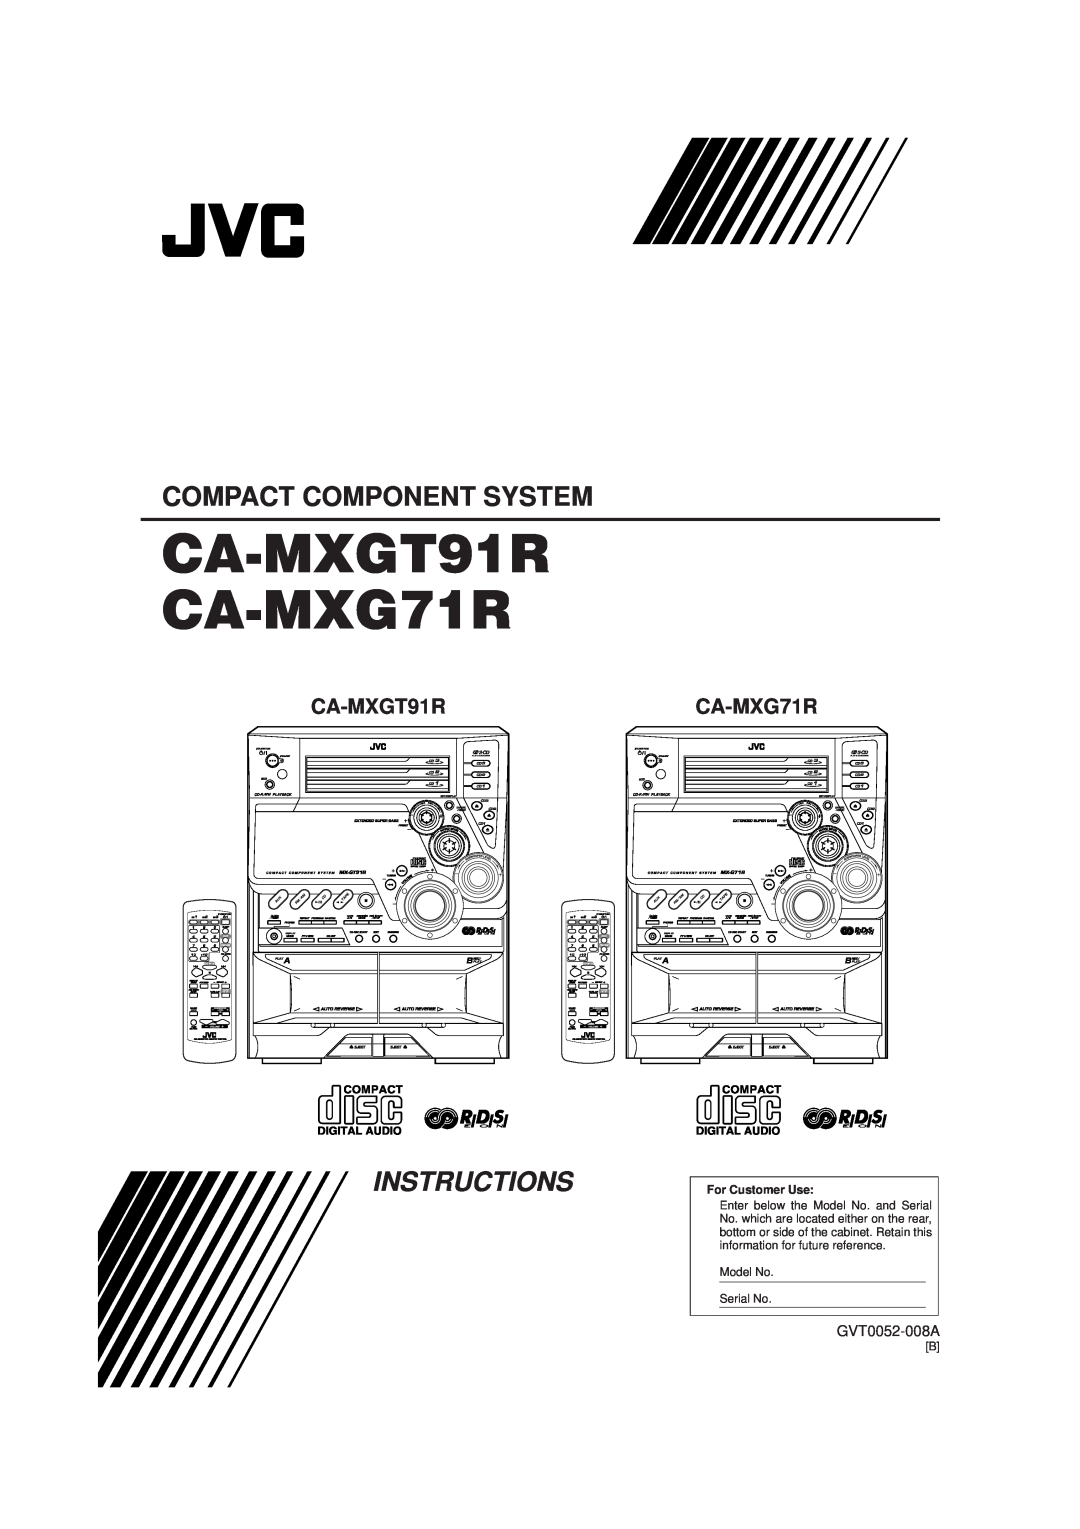 JVC manual GVT0052-008A, CA-MXGT91R CA-MXG71R, Compact Component System, Instructions, For Customer Use, MX-GT91R 